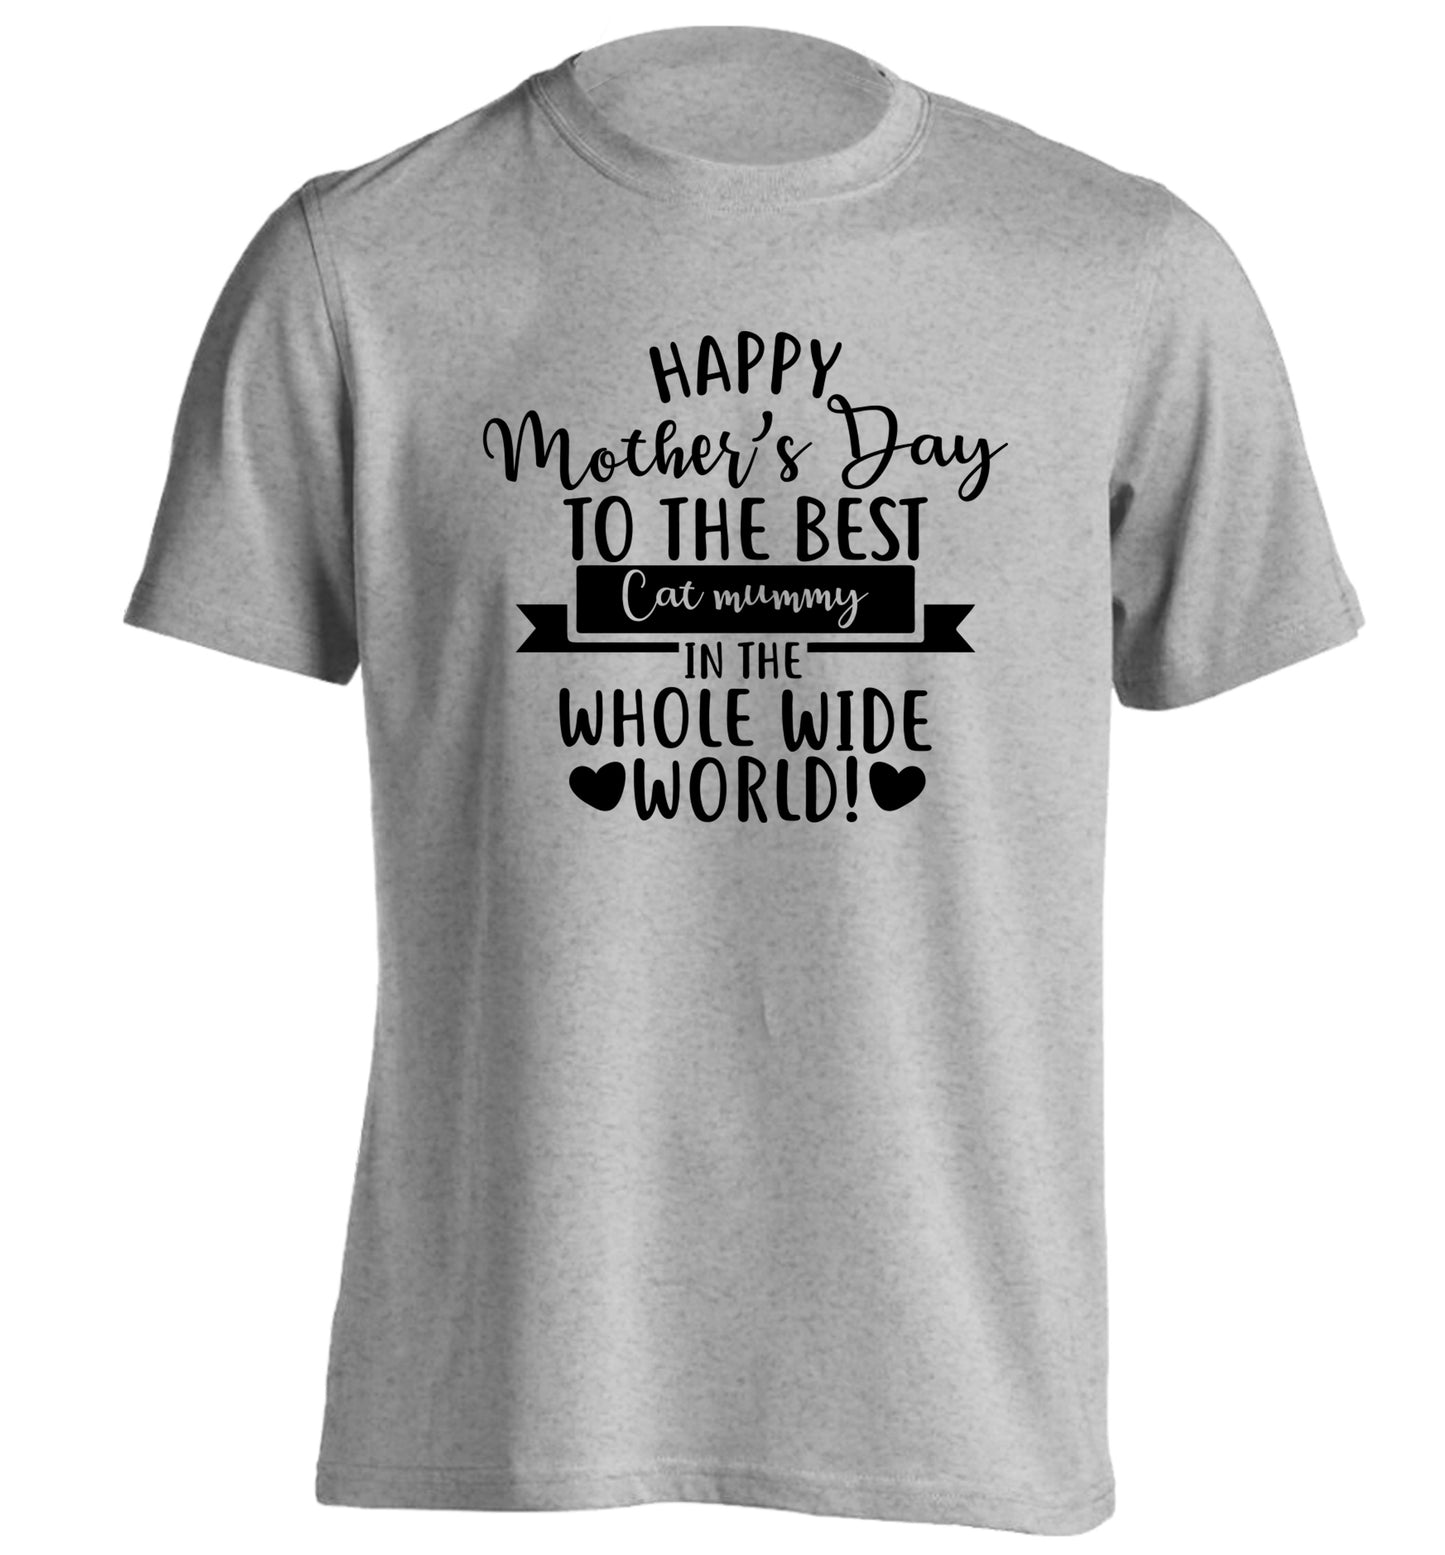 Happy mother's day to the best cat mummy in the world adults unisex grey Tshirt 2XL